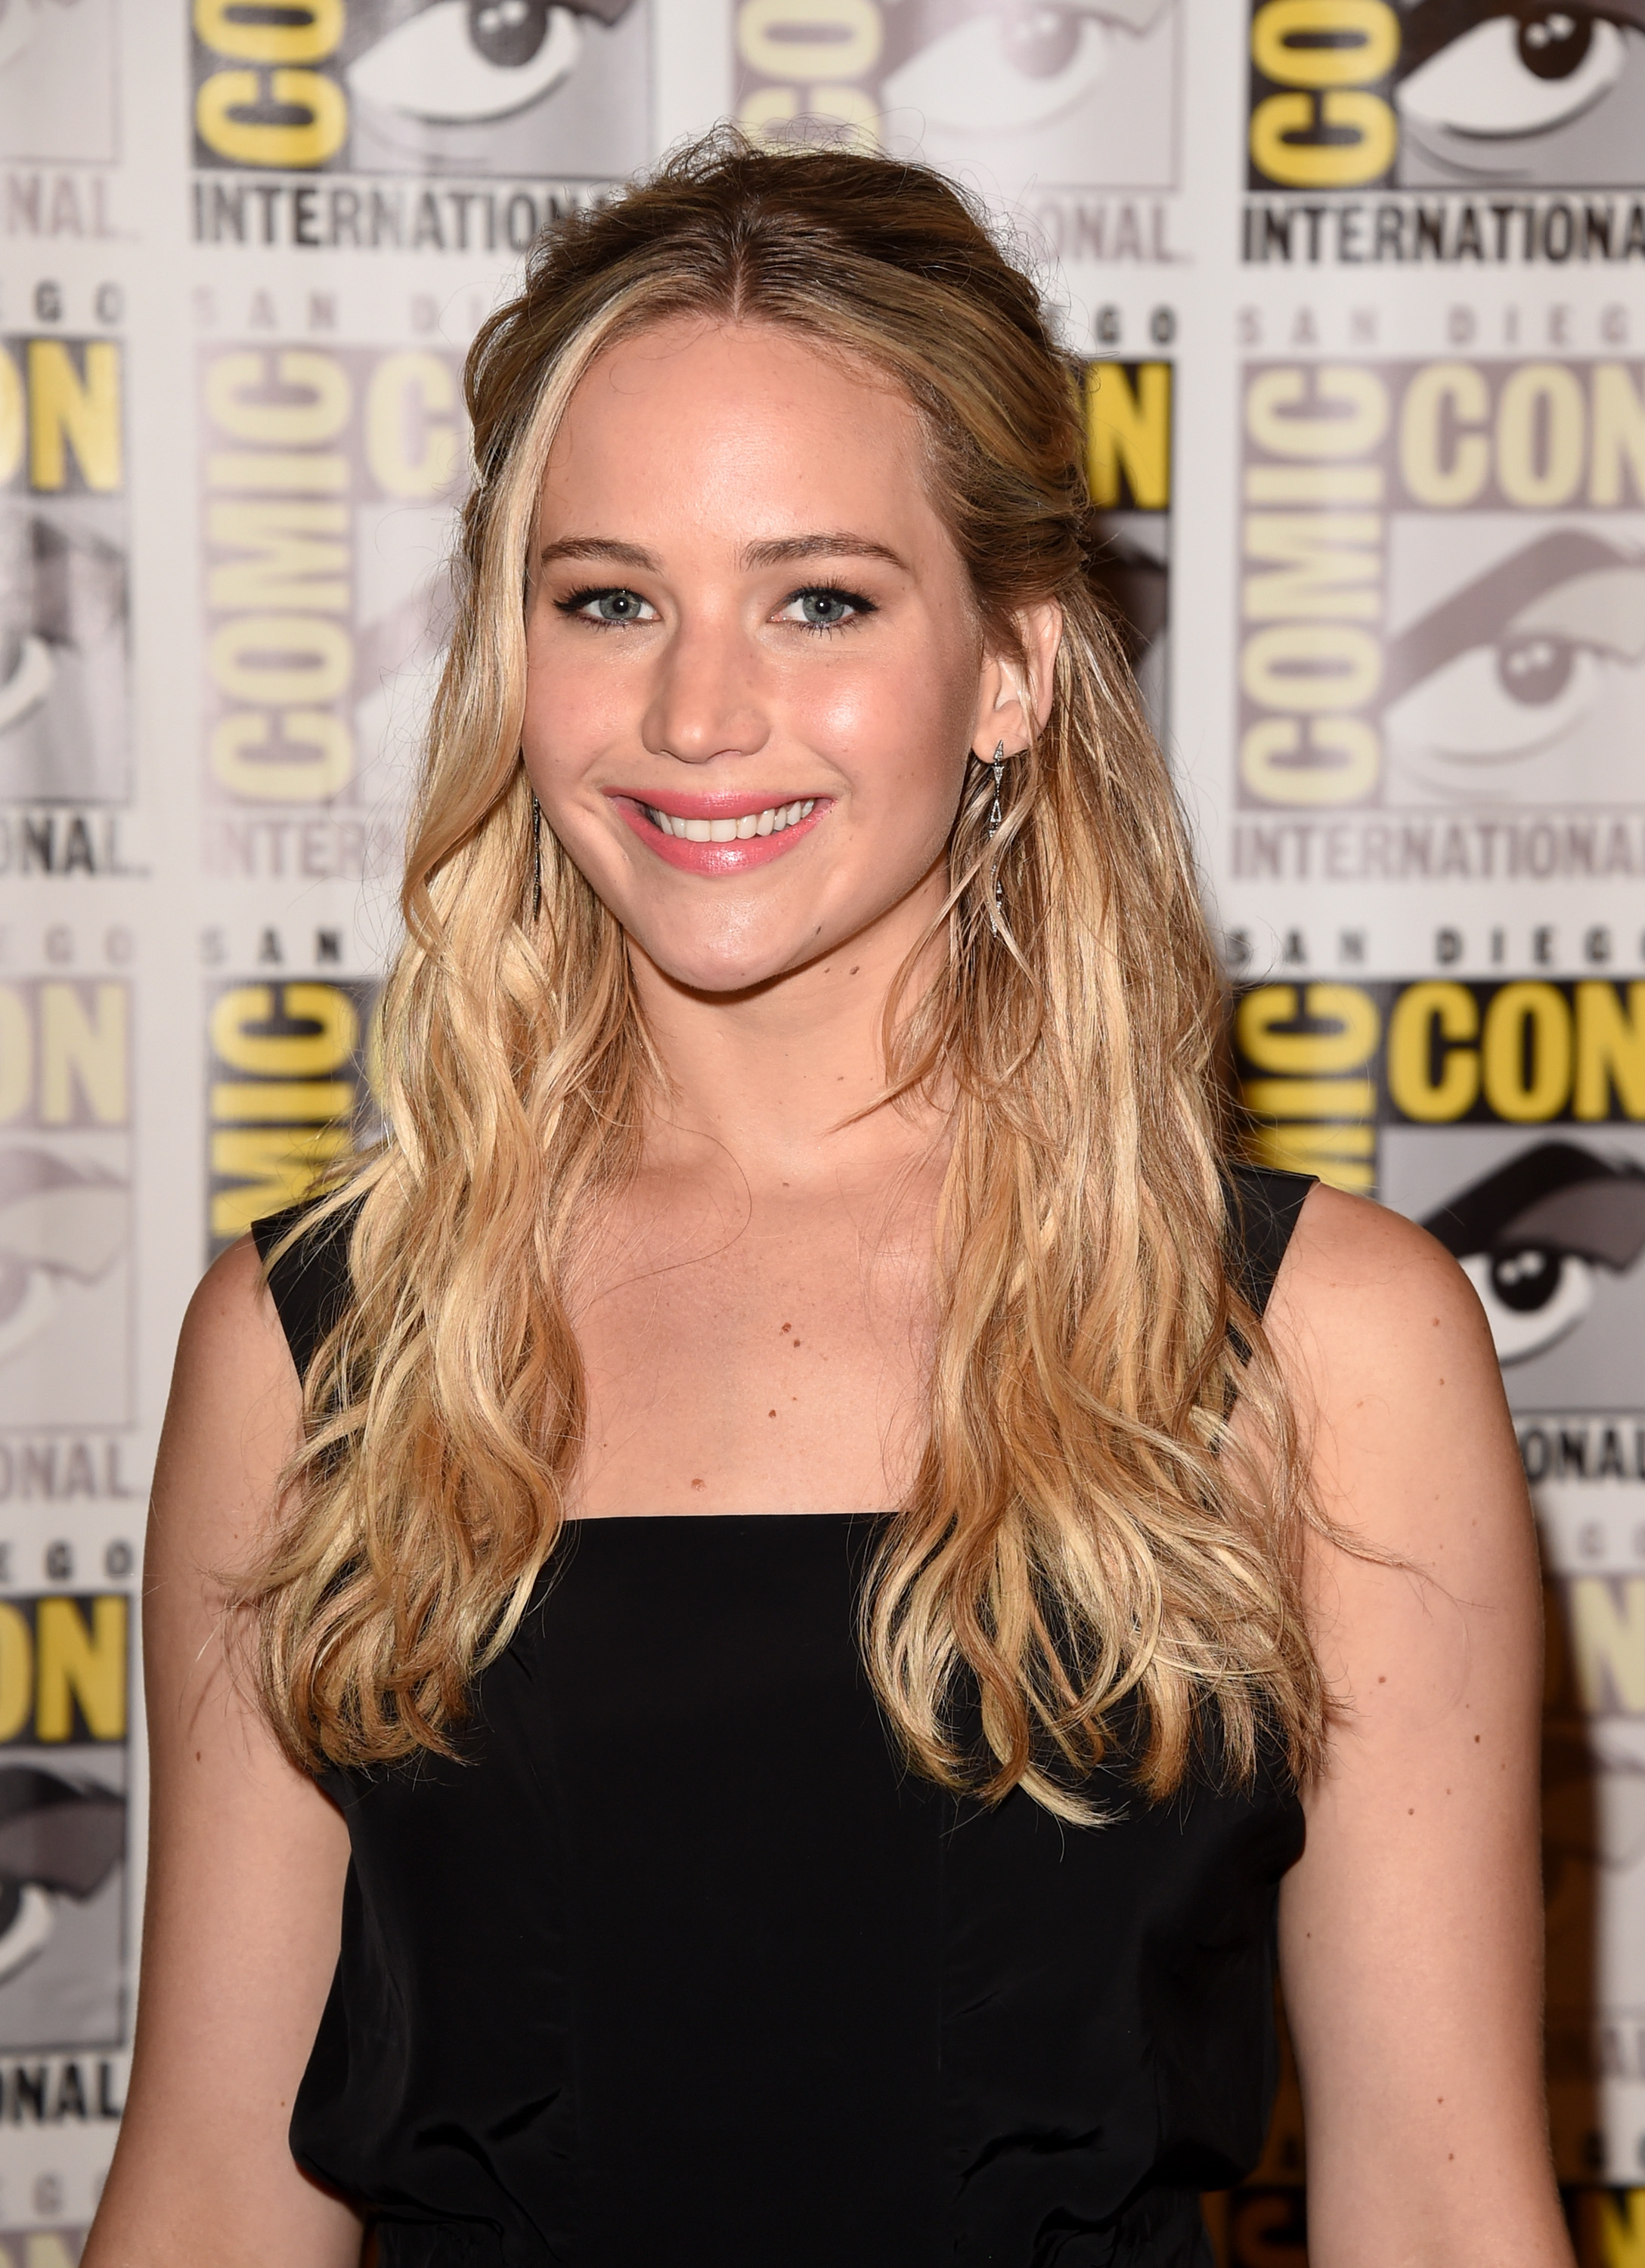 of "The Hunger Games: Mockingjay - Part 2" attends the Lionsgate press room during Comic-Con International 2015 at the Hilton Bayfront on July 9, 2015 in San Diego, California.